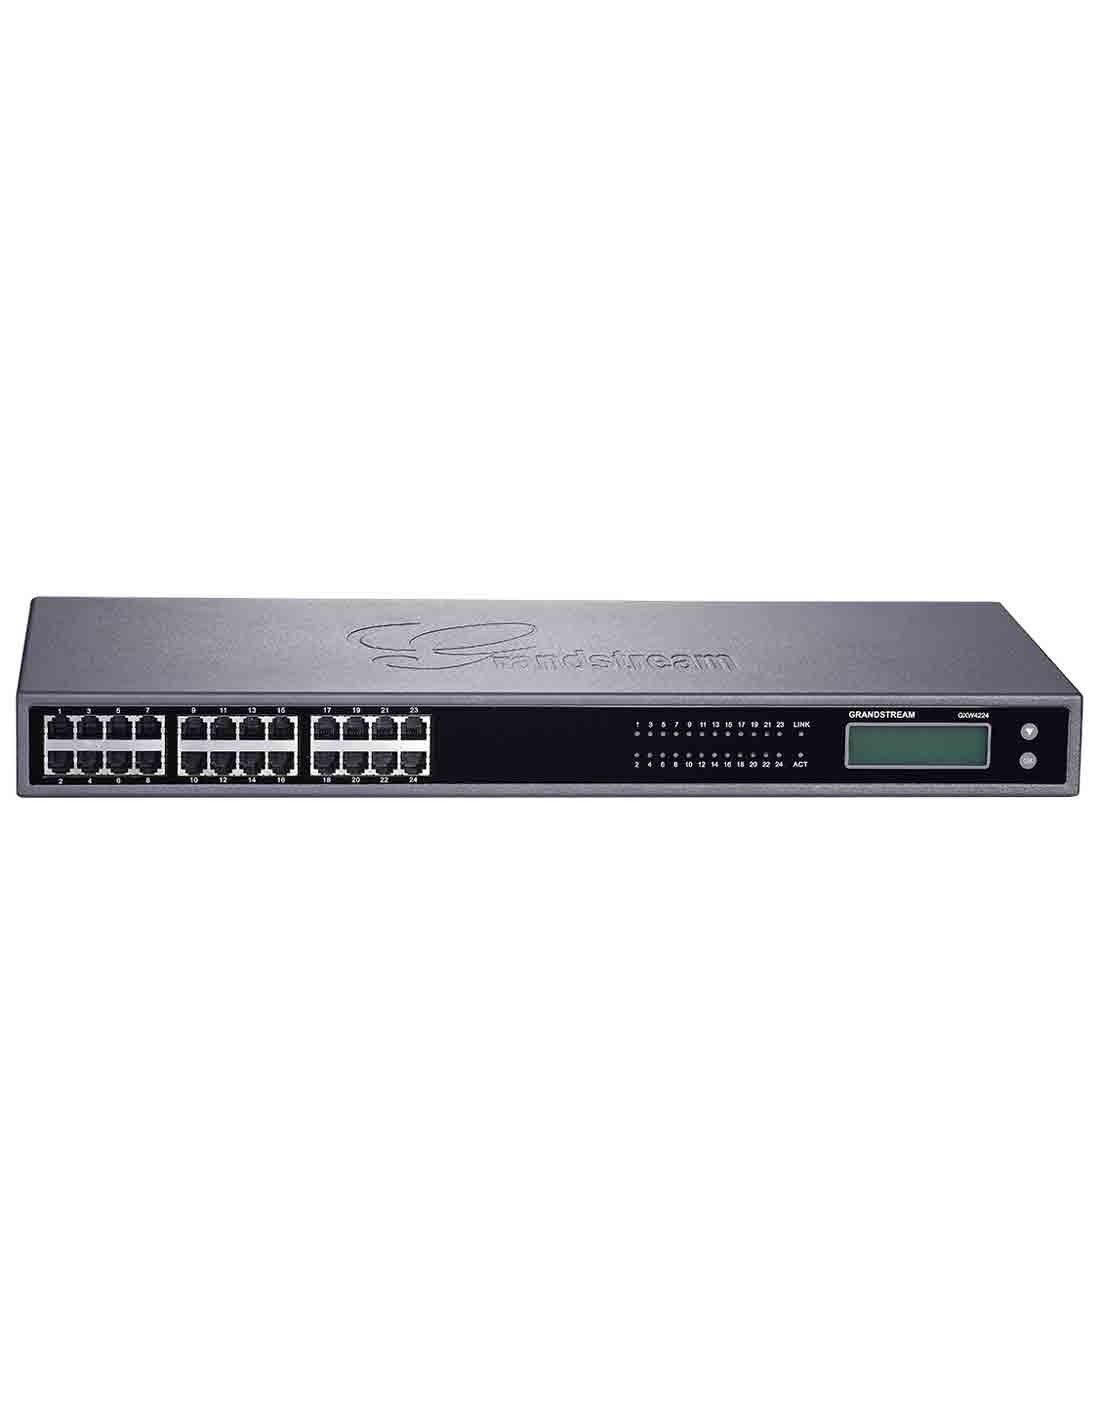 Grandstream GXW4224 FXS Analog IP Gateway with best deal options in Dubai Online Store